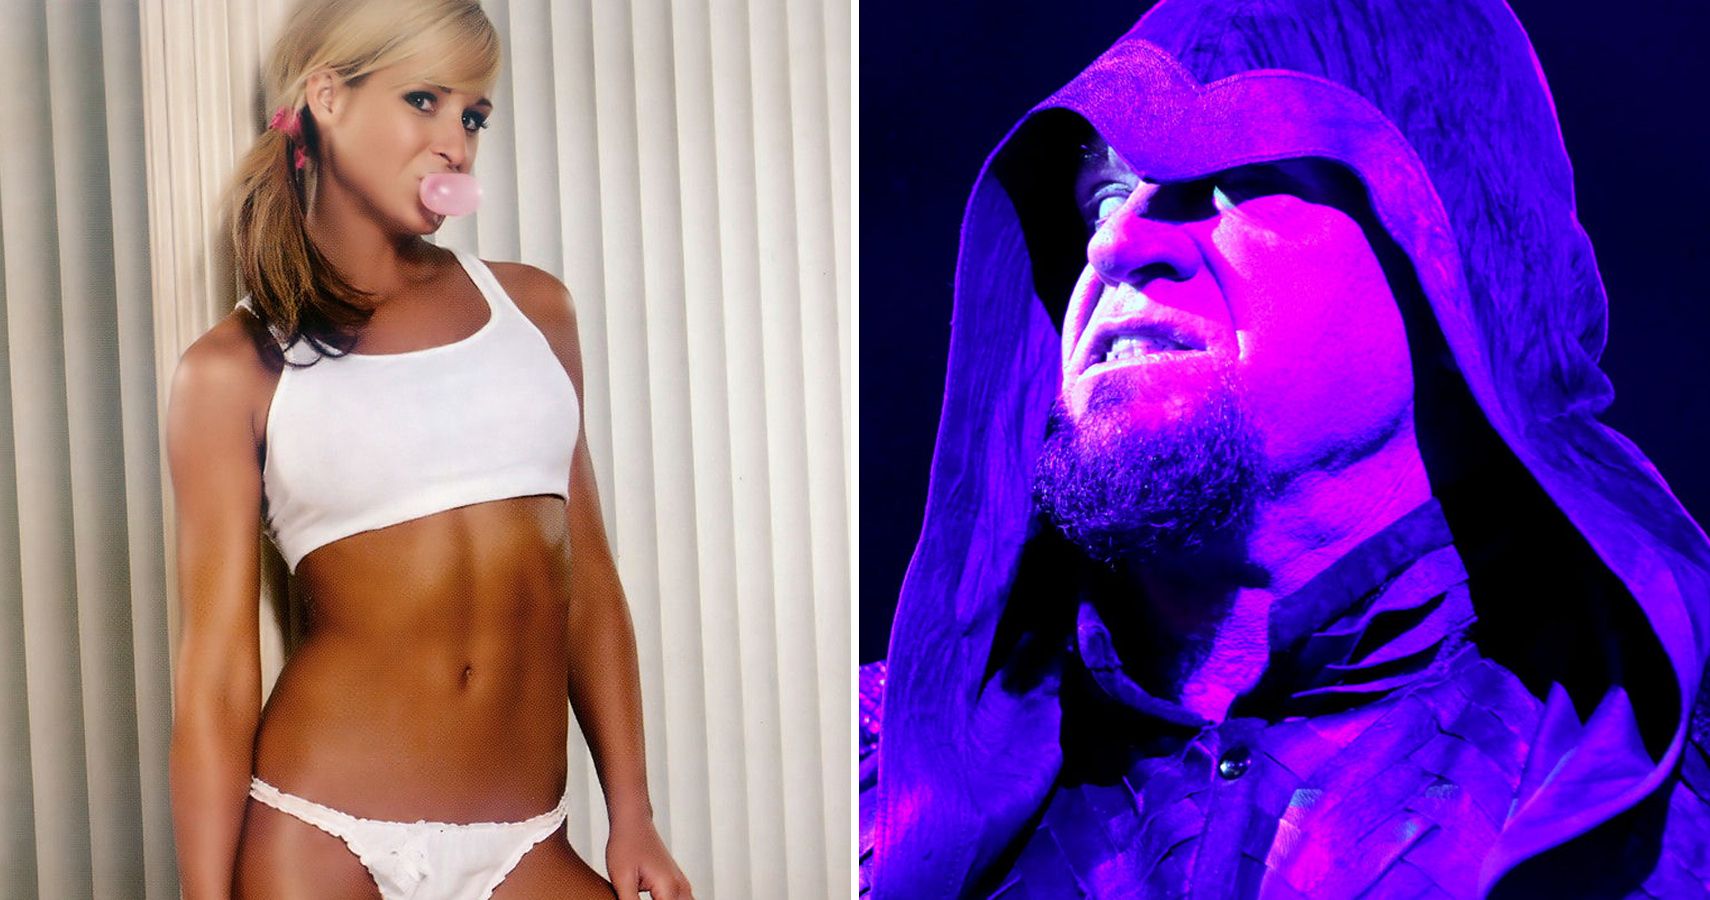 Michelle mccool naked